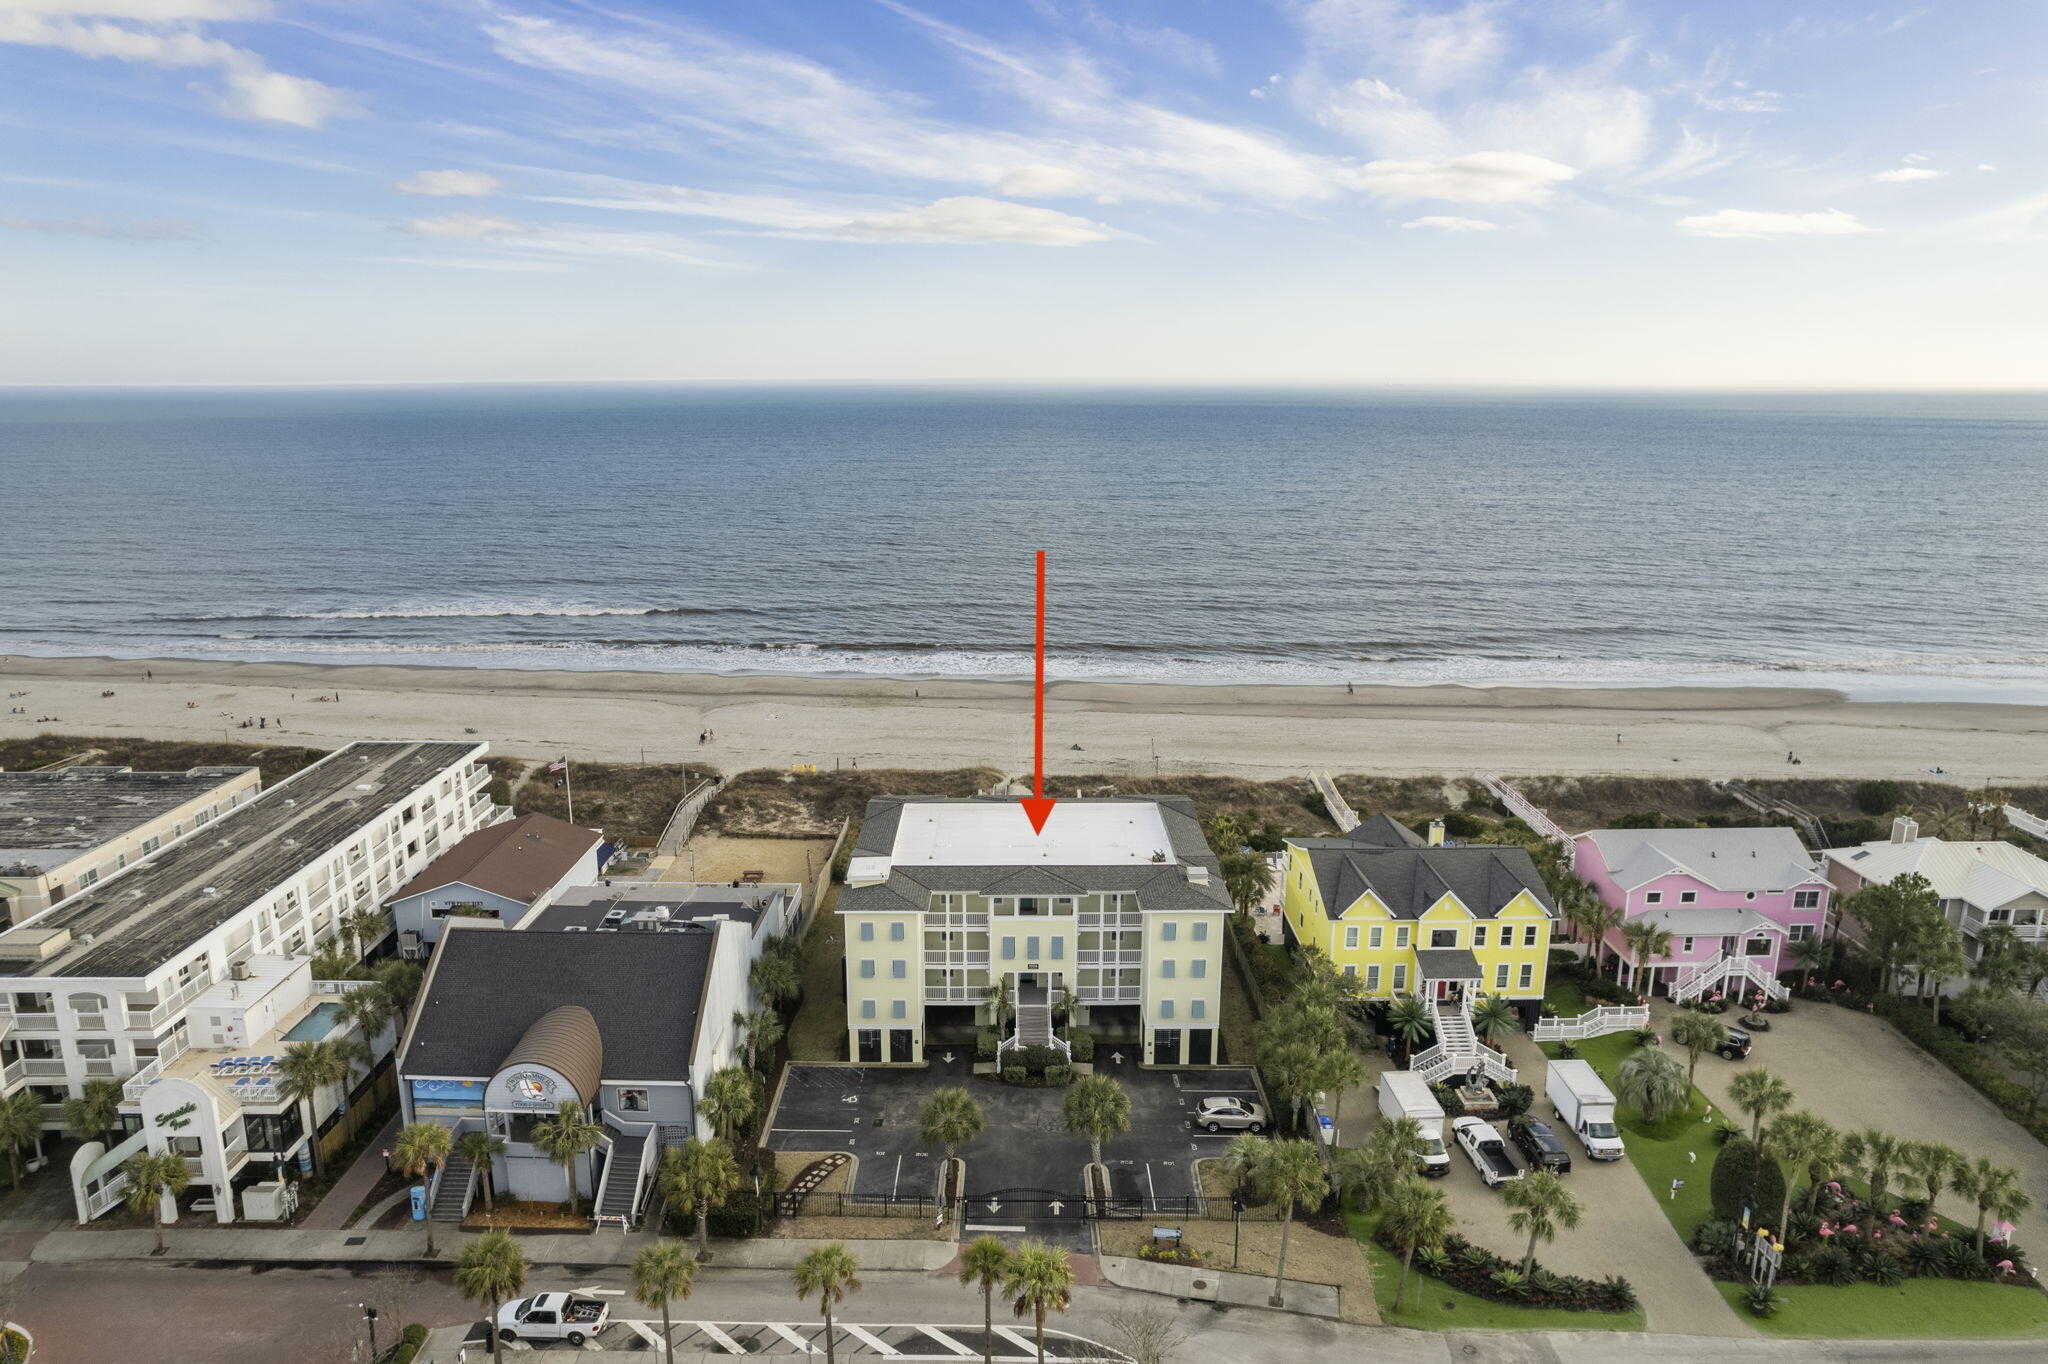 View Isle of Palms, SC 29451 house